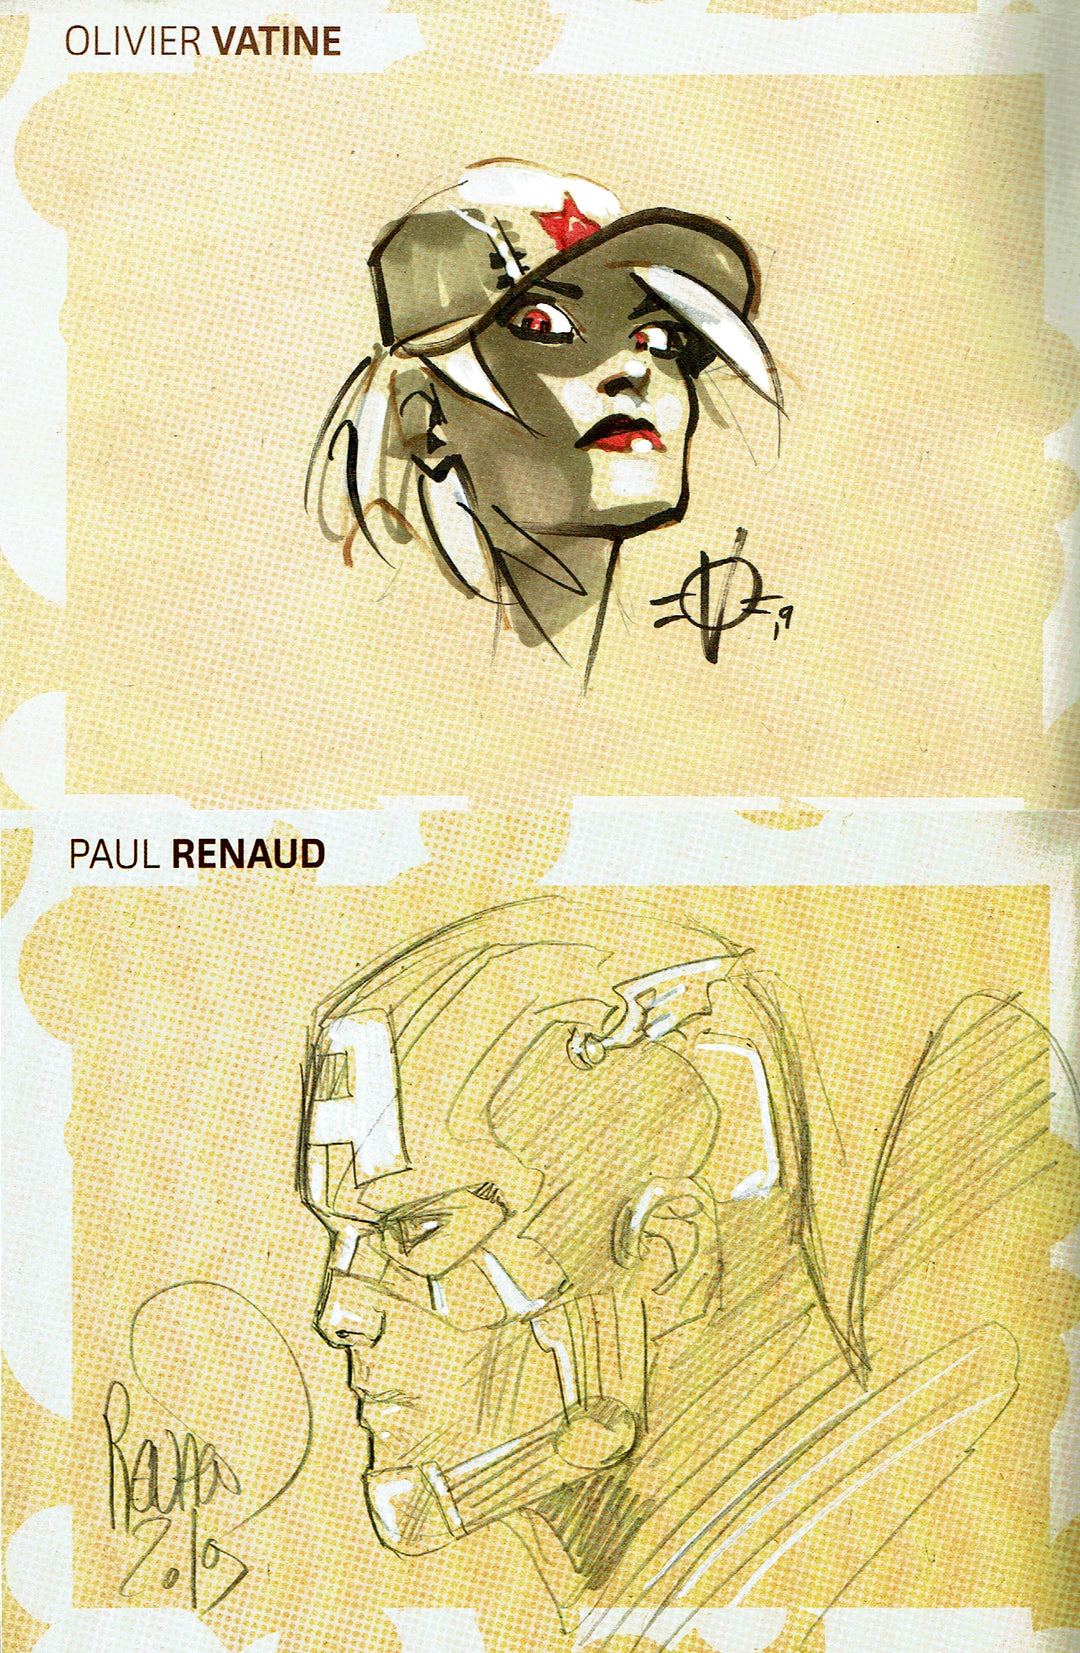 Double Feature #1: Paul Renaud/Olivier Vatine - Signed with Head Sketches by Both Artists [Set F]